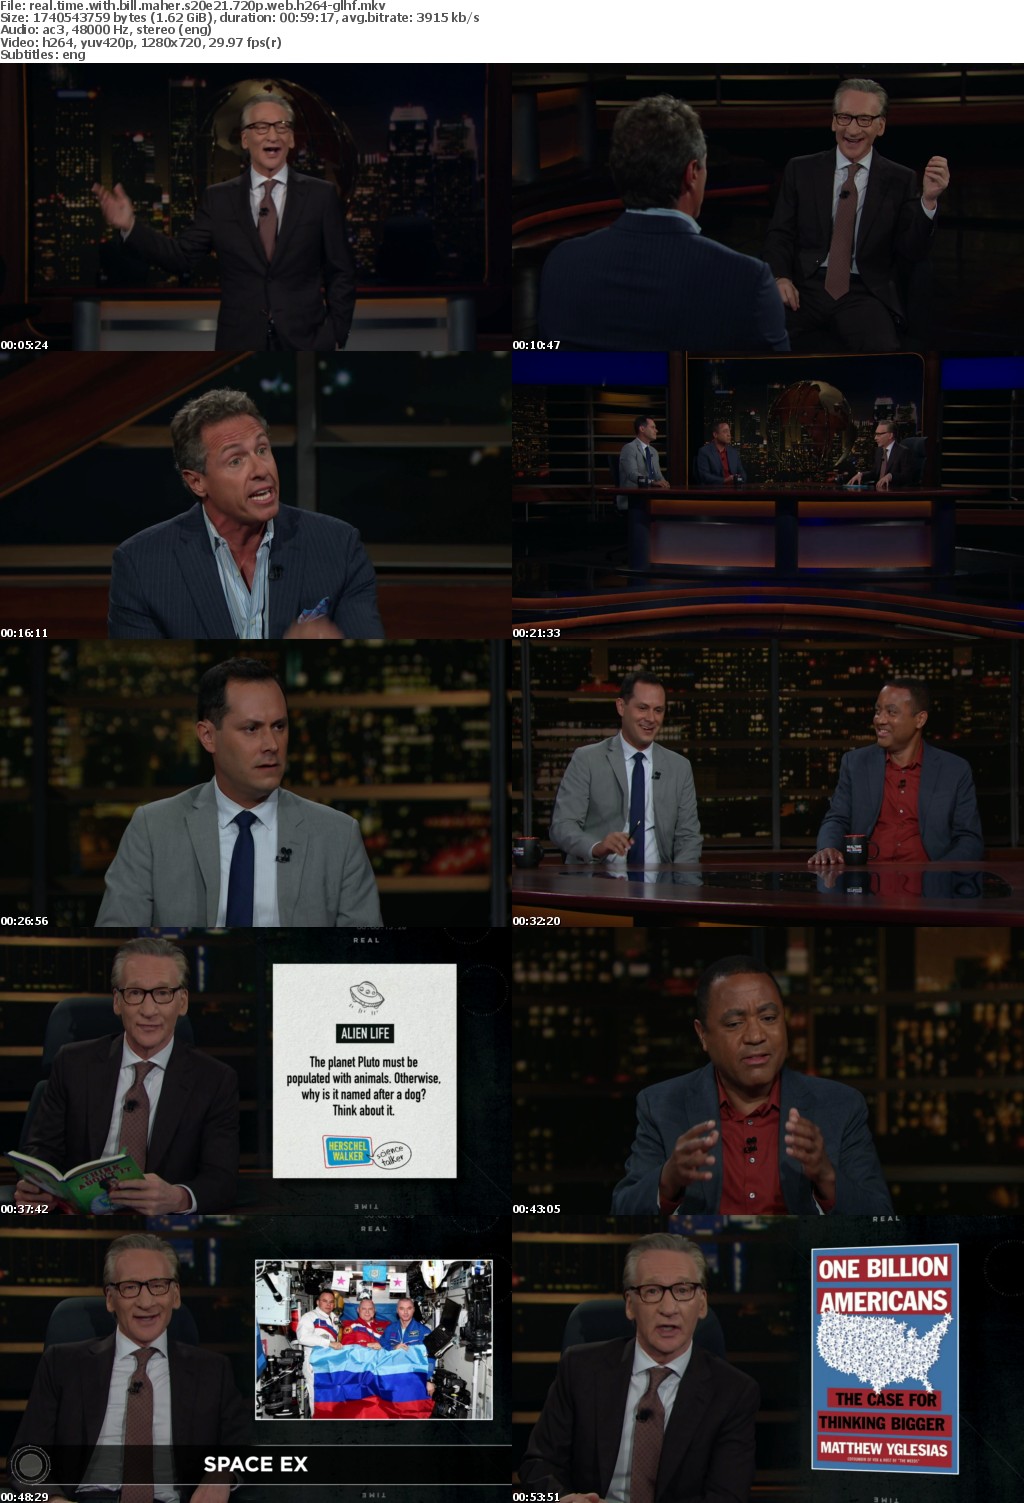 Real Time with Bill Maher S20E21 720p WEB H264-GLHF